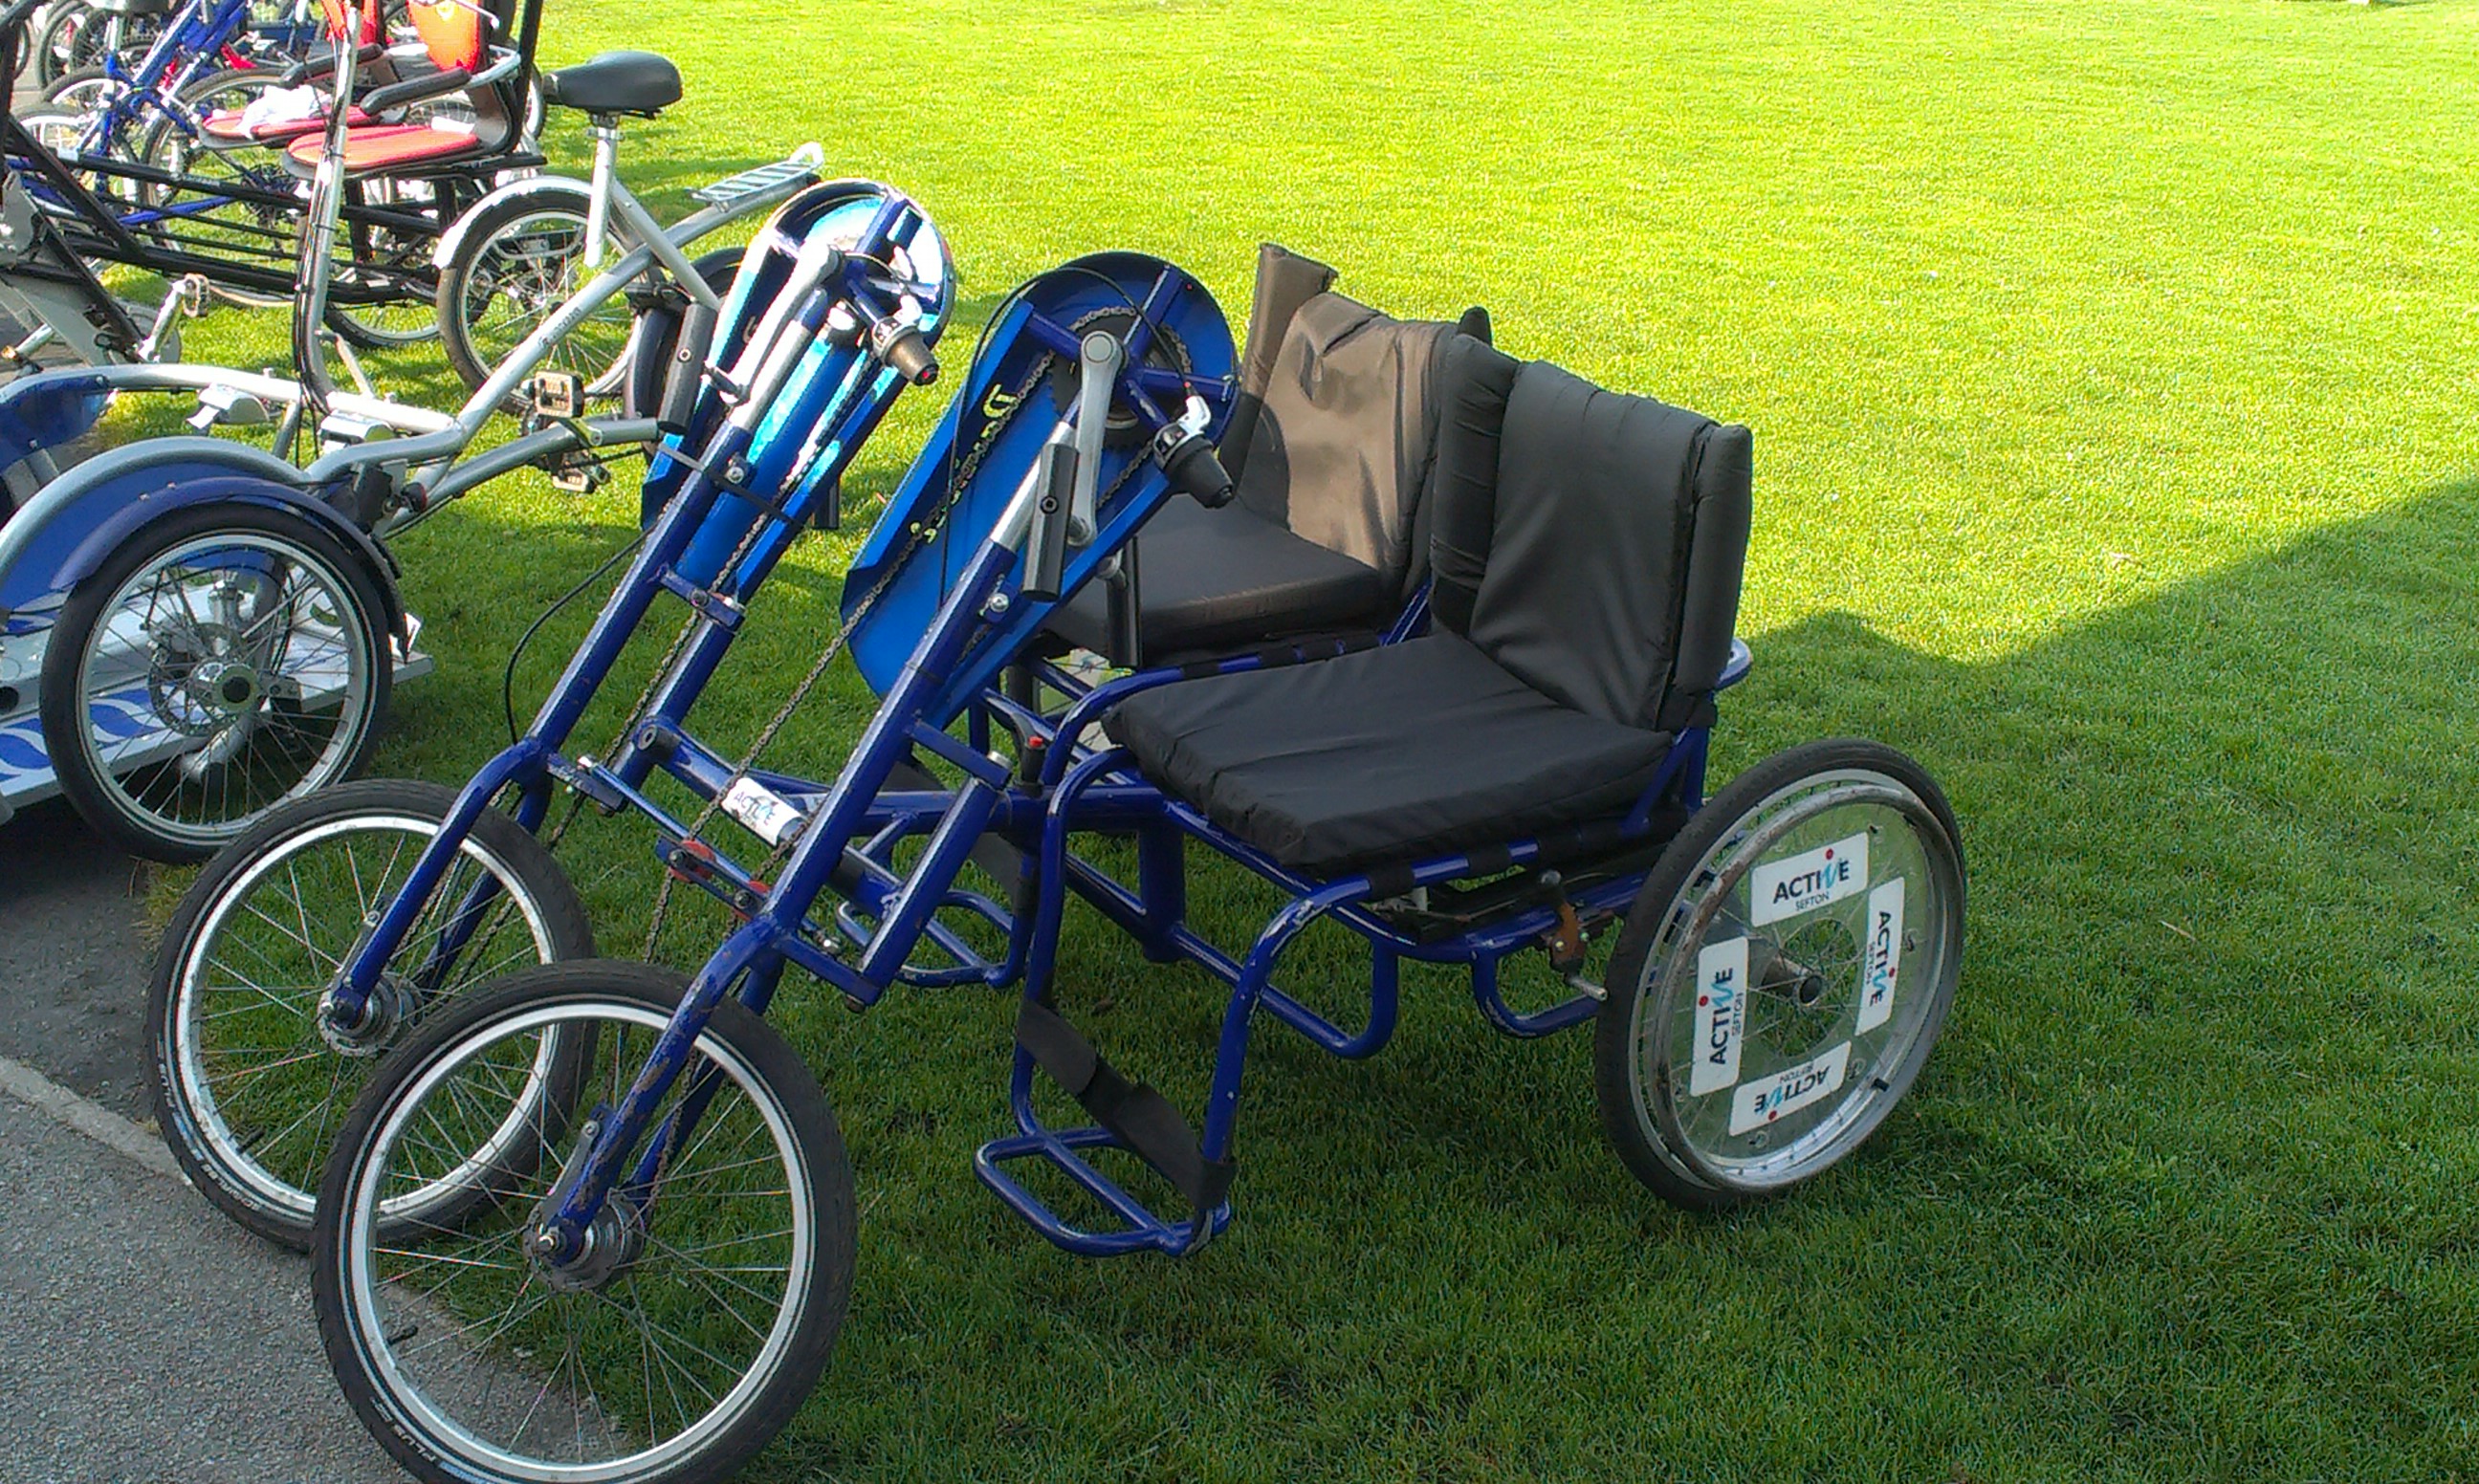 Side by side tandem hand cycle